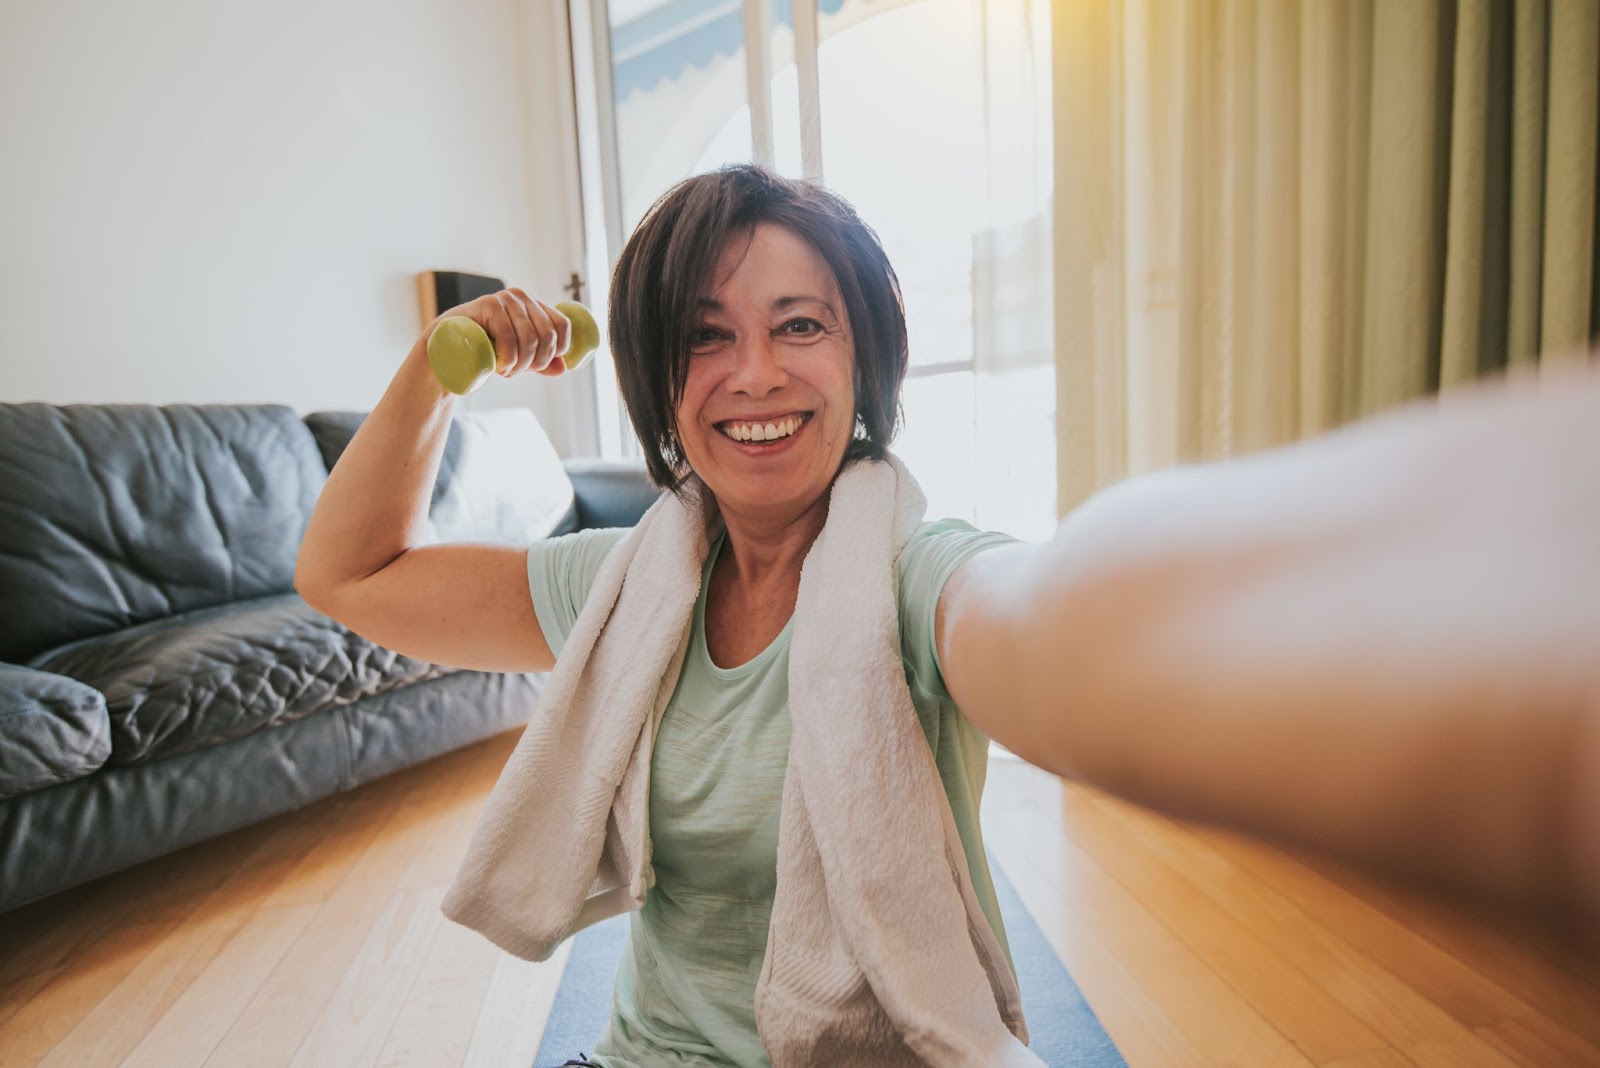 Woman taking a selfie for her workout progress